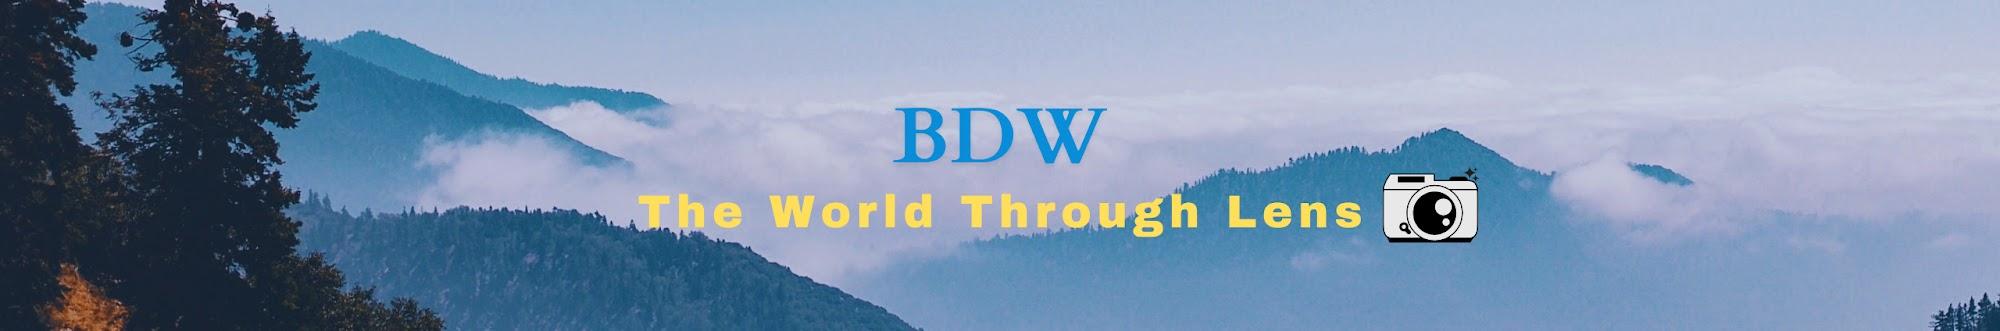 BDW Relaxational Travel TV